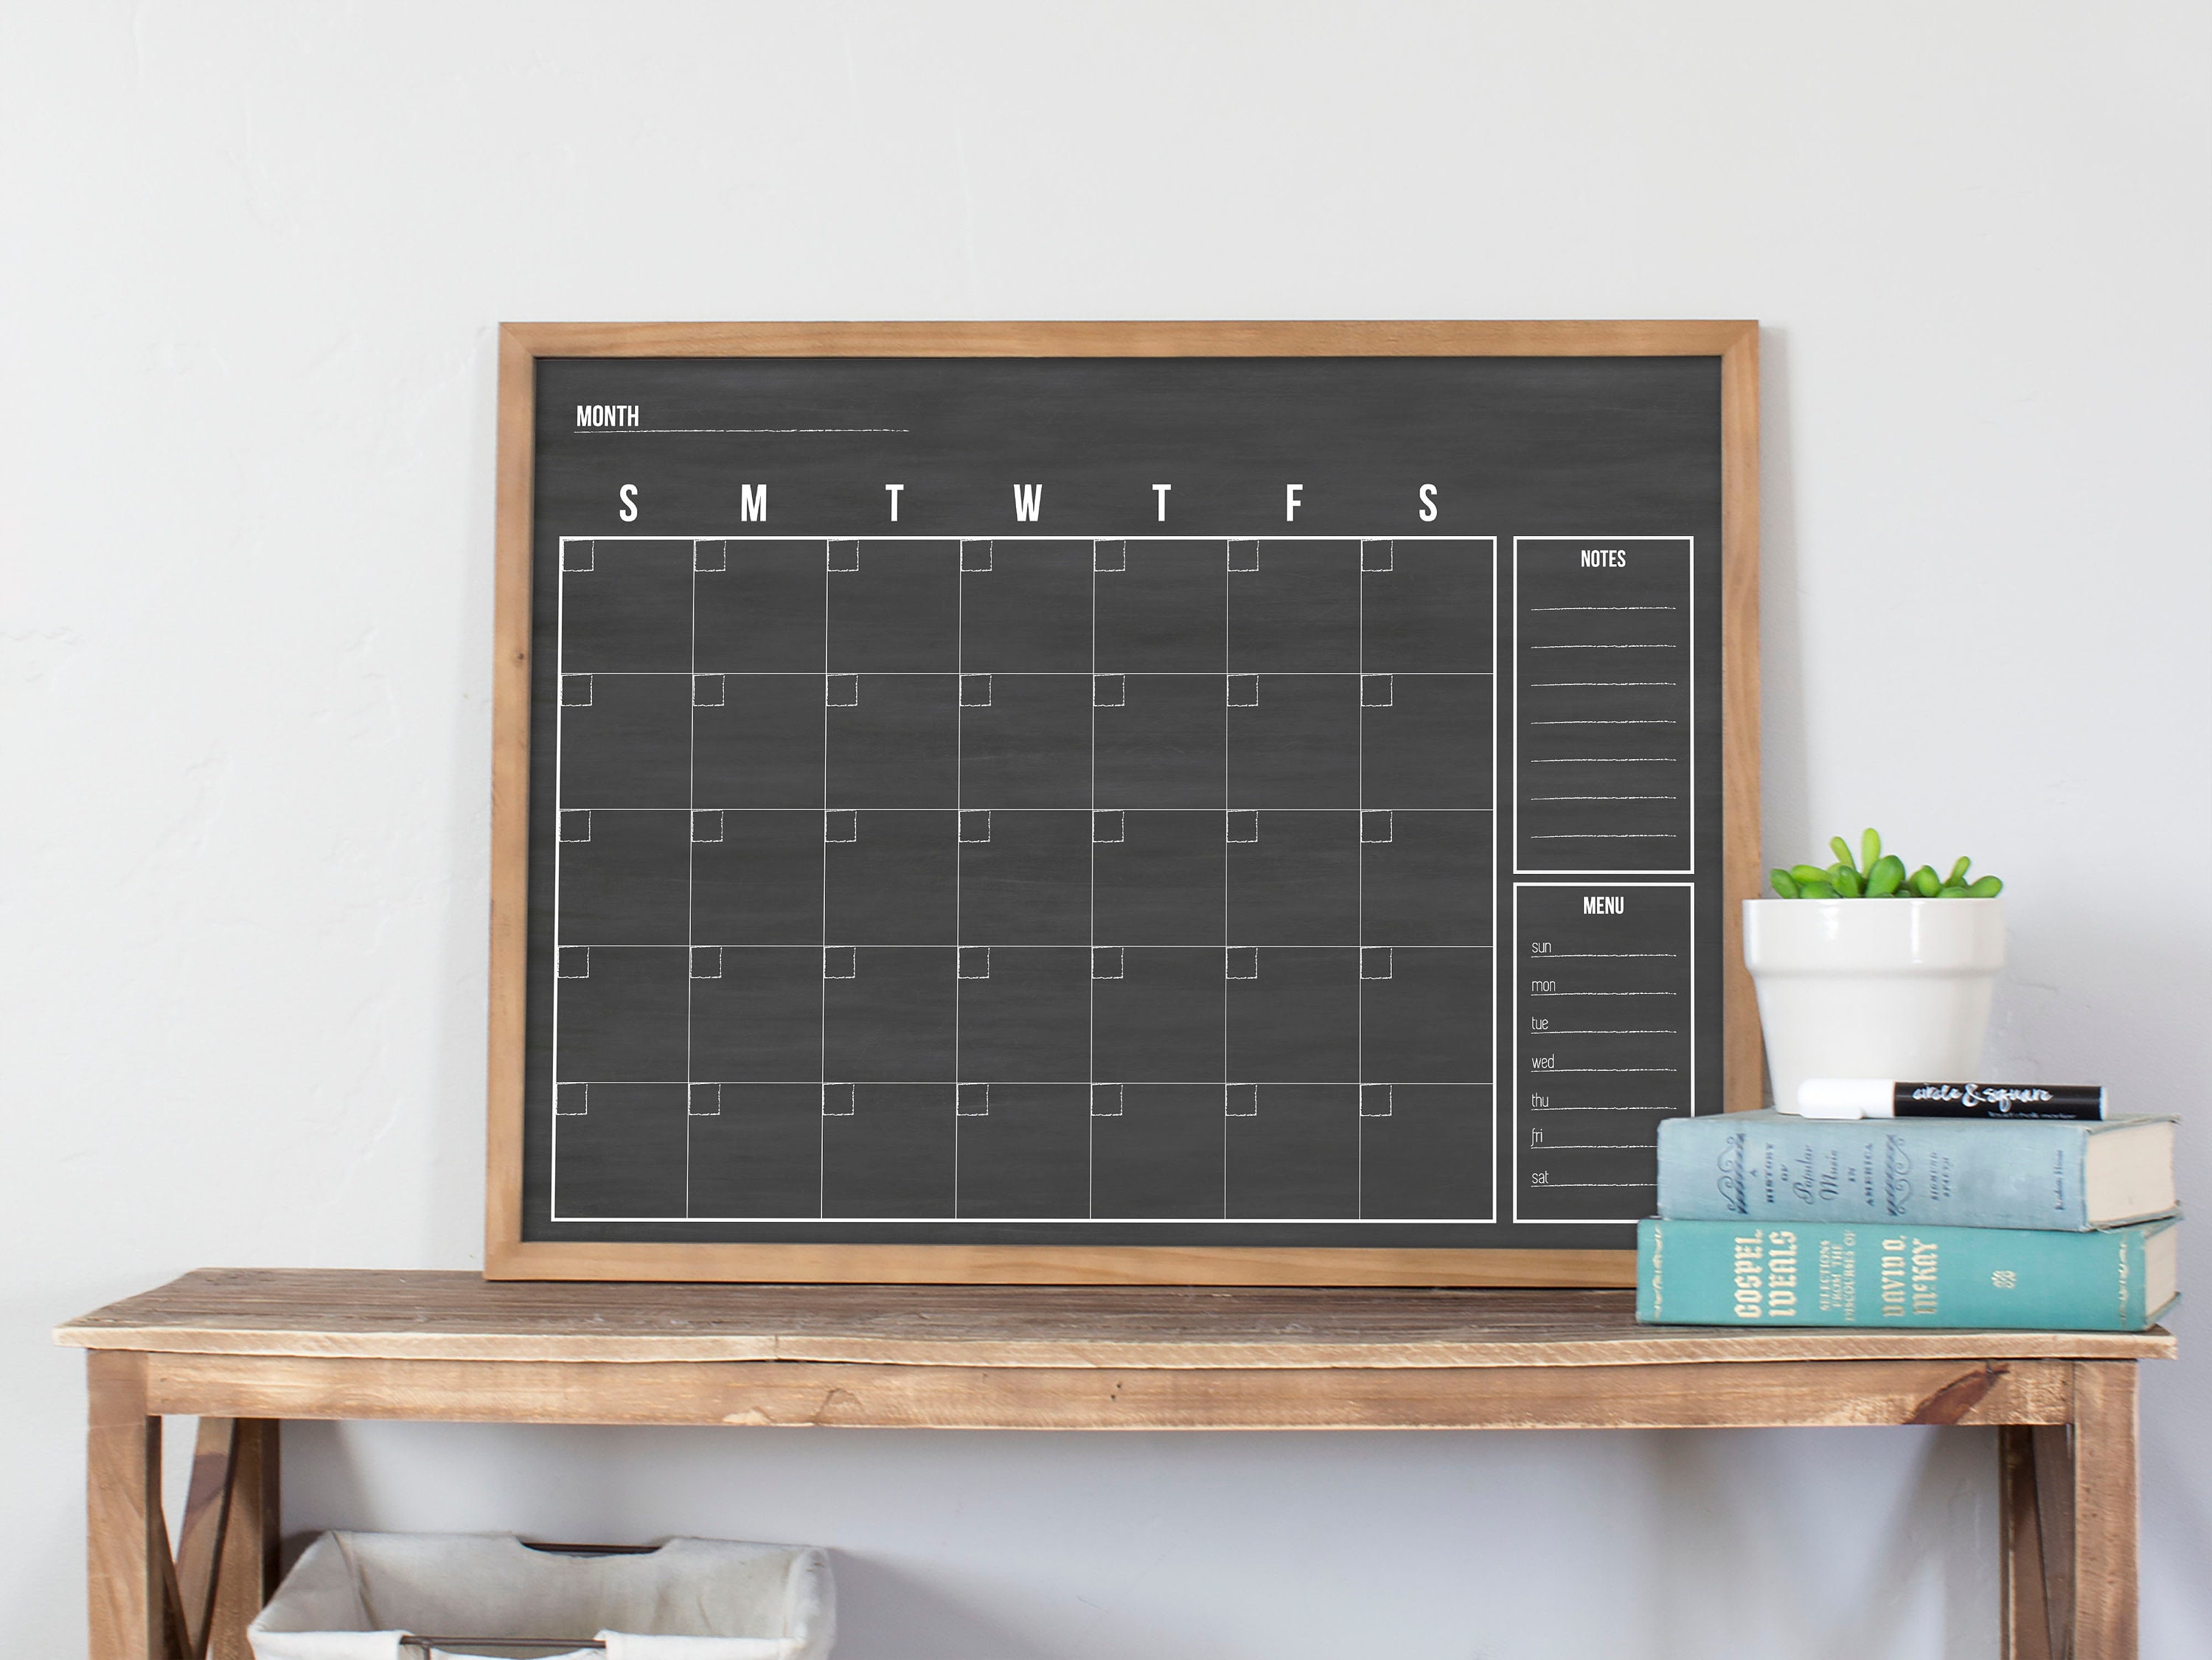 Magnetic Wall Chalkboard Monthly Calendar, Rustic Wood Frame Large  Chalkboard Calendar, 24 x 30, Wall Mount, with Chalk Marker & Magnets, by  Better